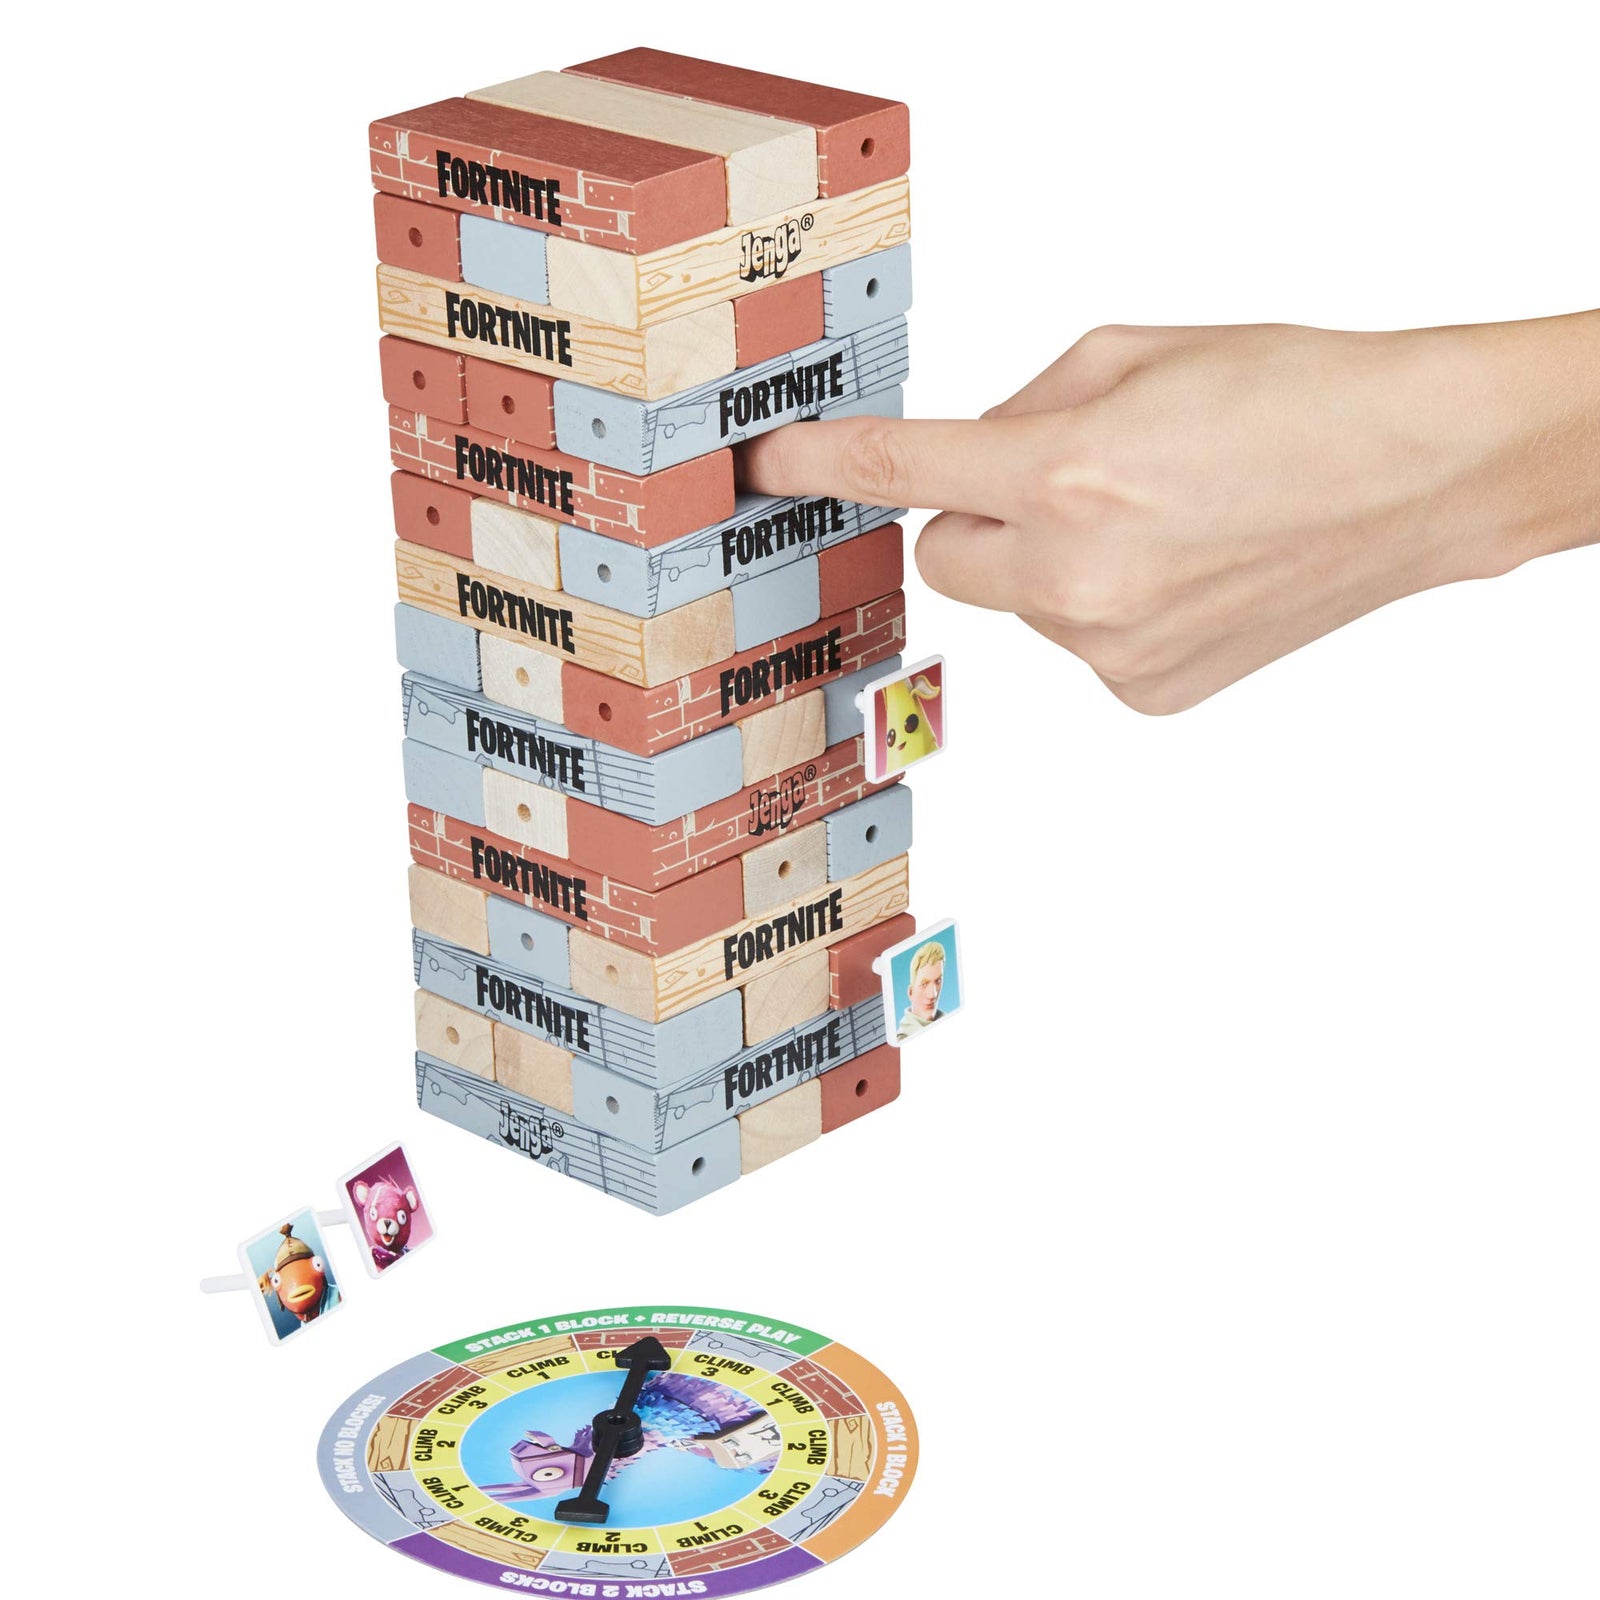 Hasbro Gaming Jenga: Fortnite Edition Game, Wooden Block Stacking Tower Game for Fortnite Fans, Ages 8 & Up